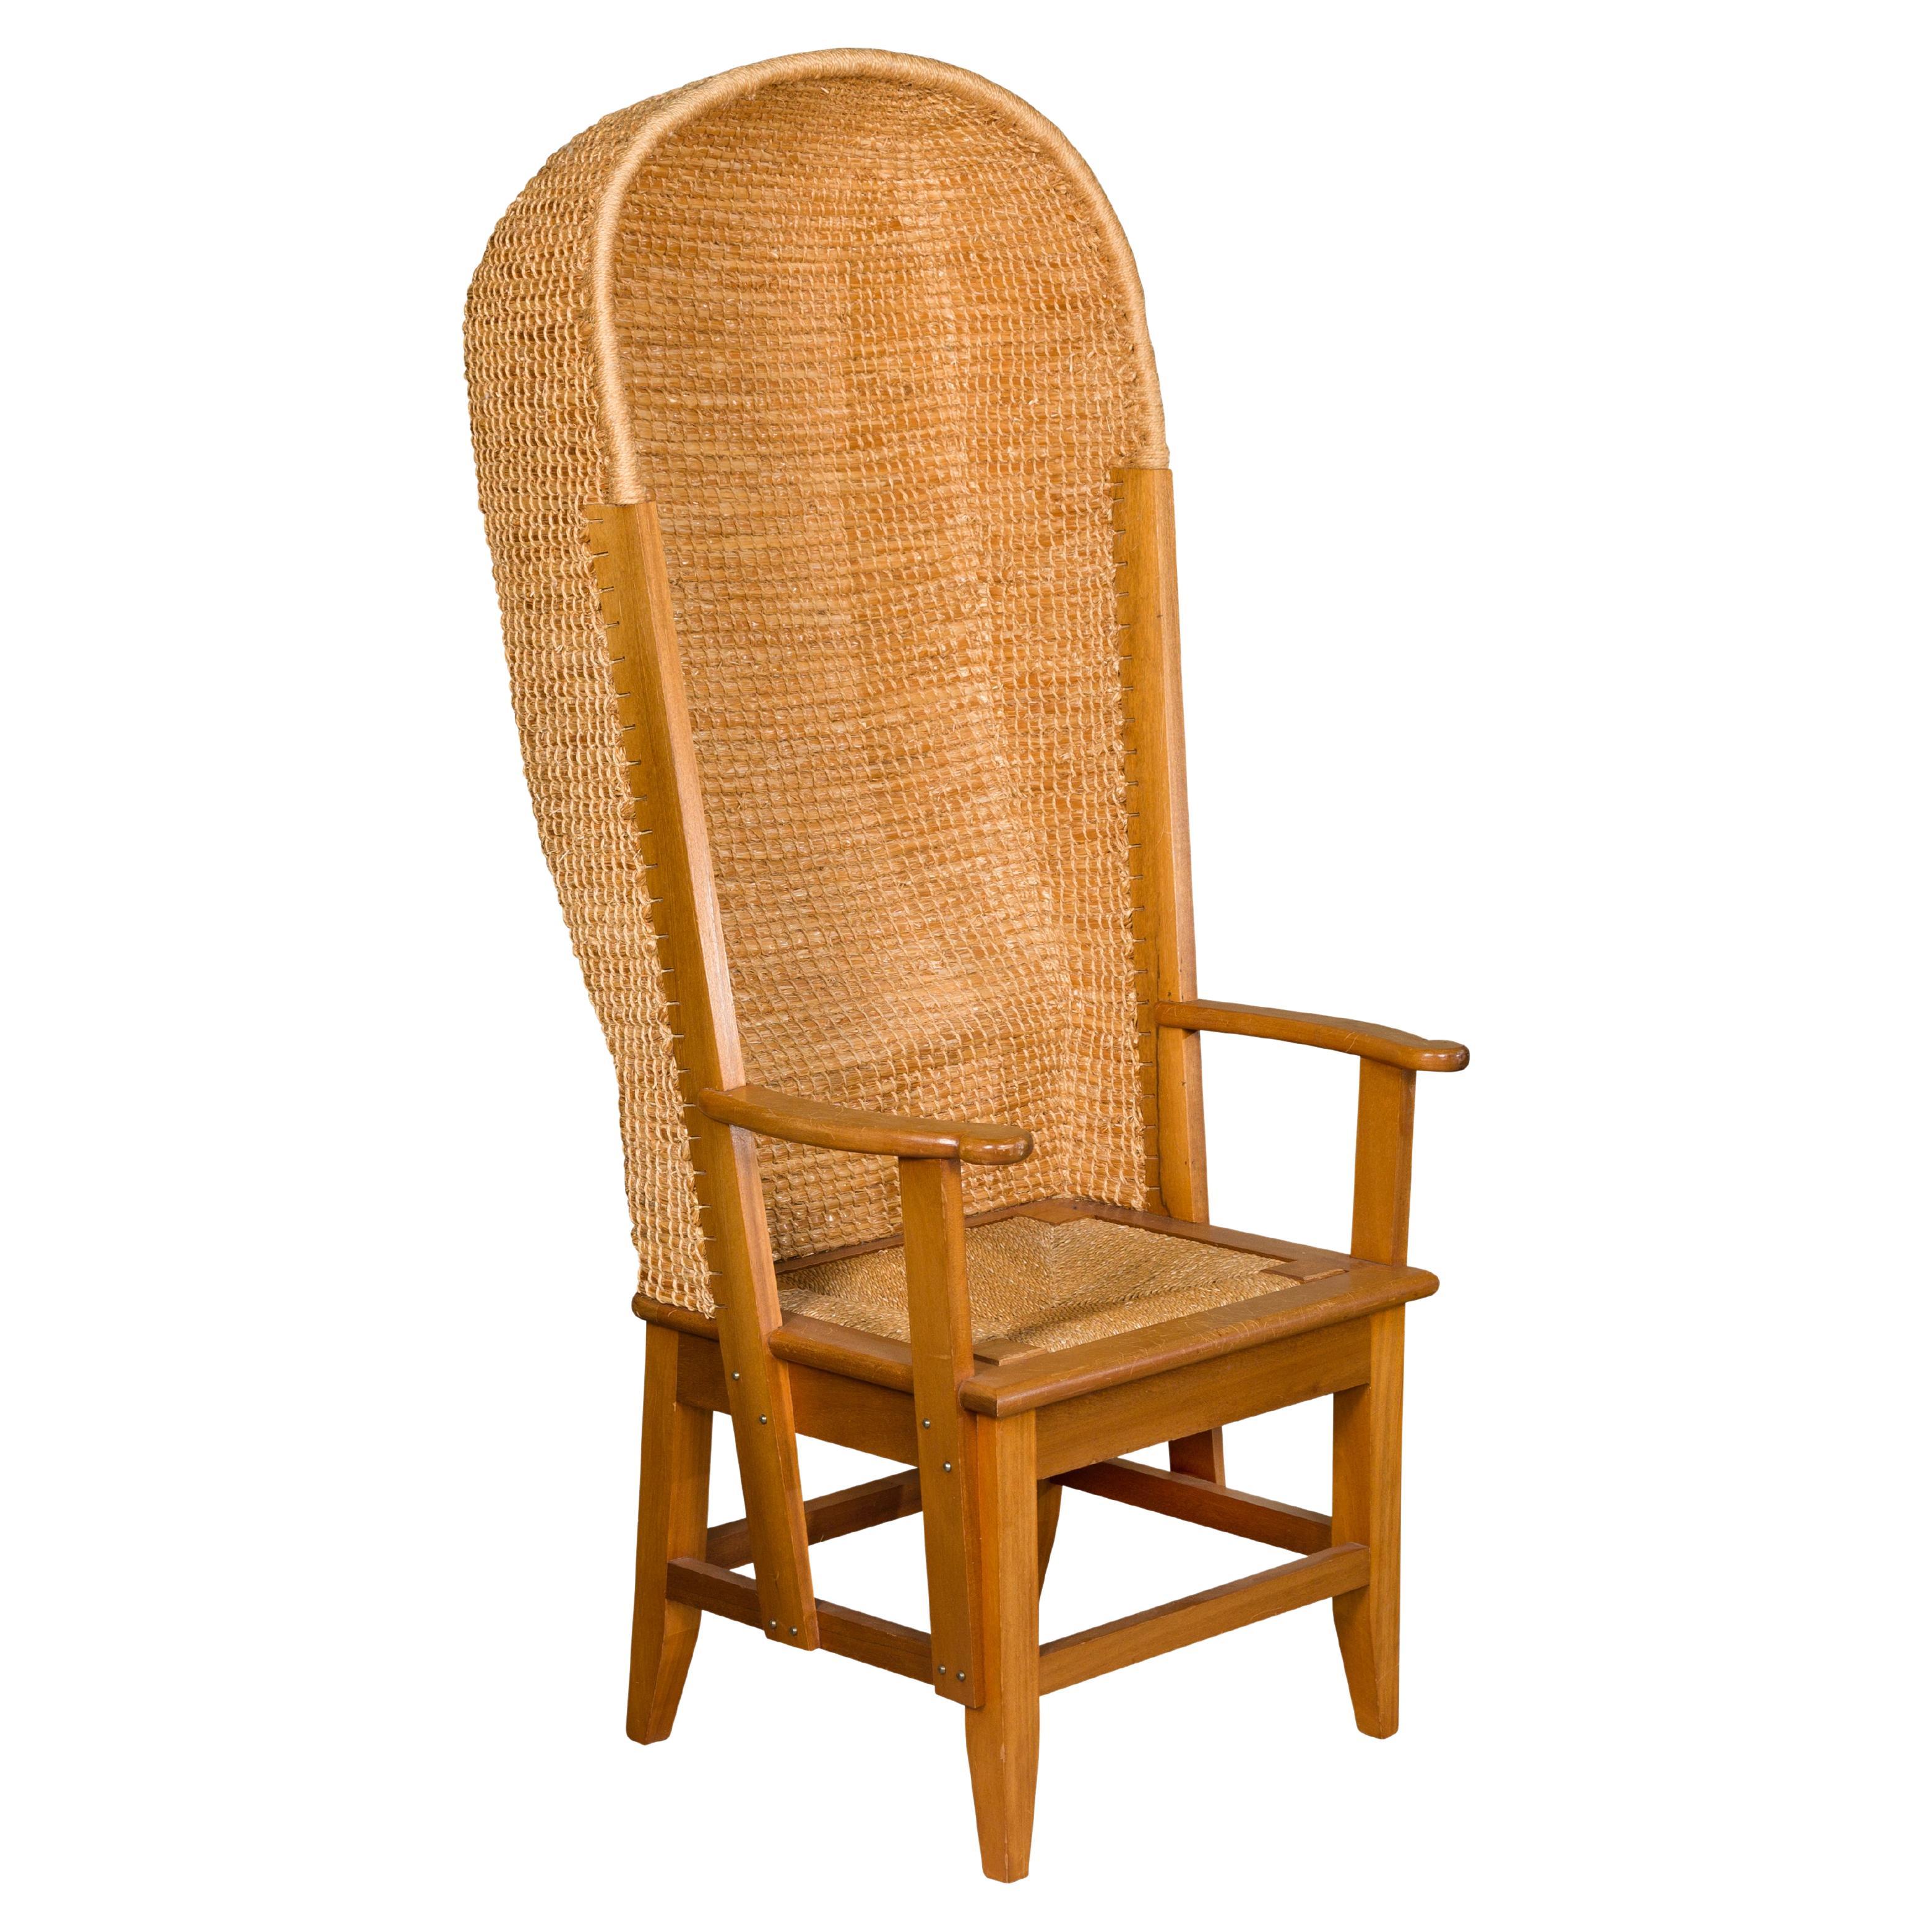 Orkney Island Midcentury Scottish Canopy Chair with Hand Woven Straw Back